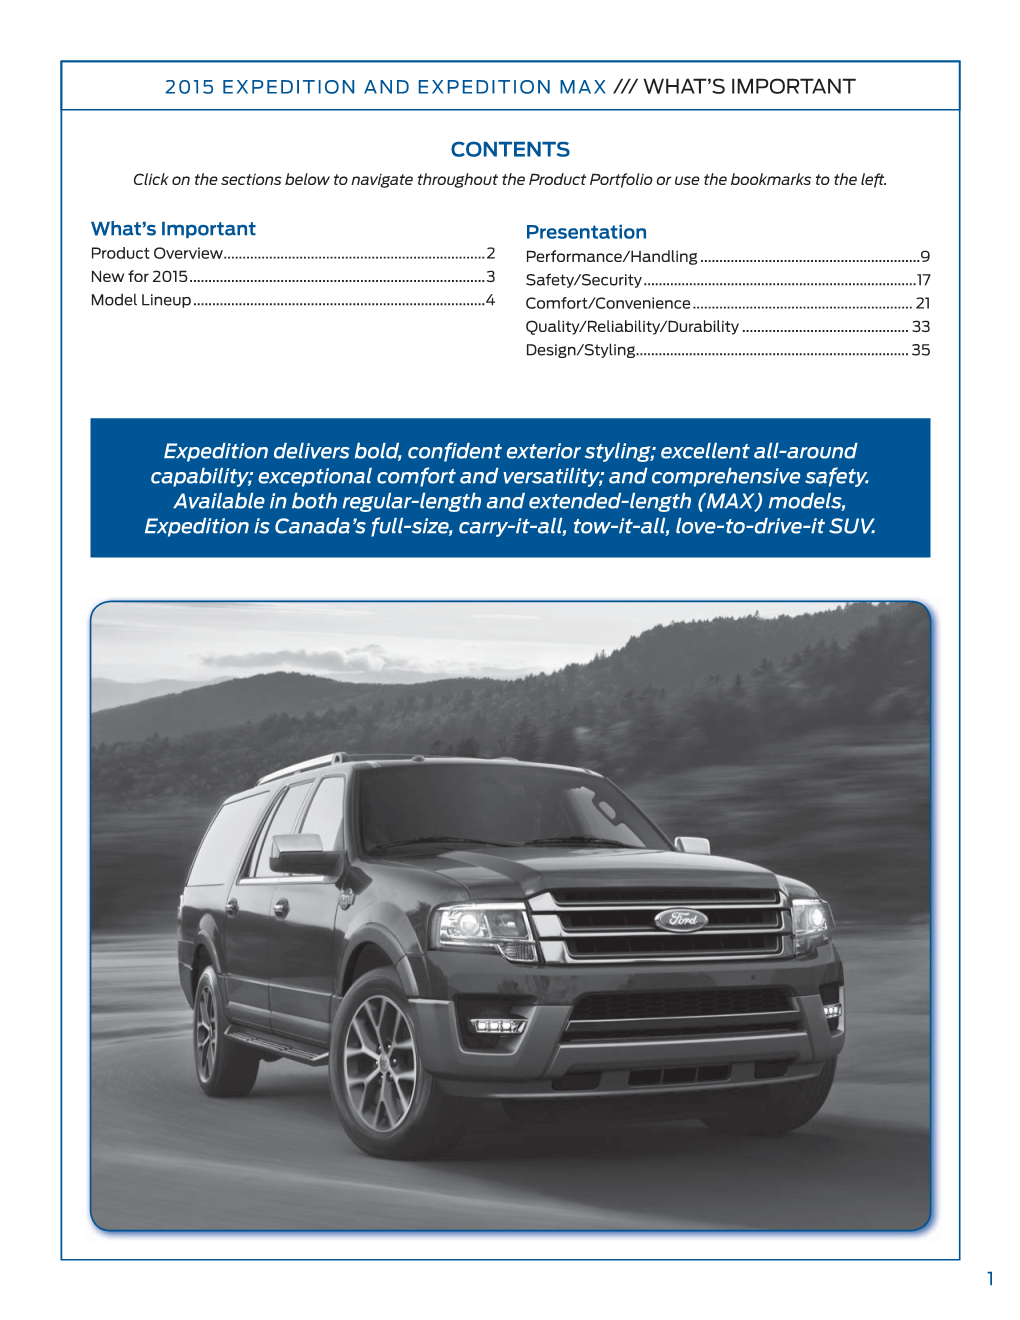 2015-Expedition Brochure.Pdf